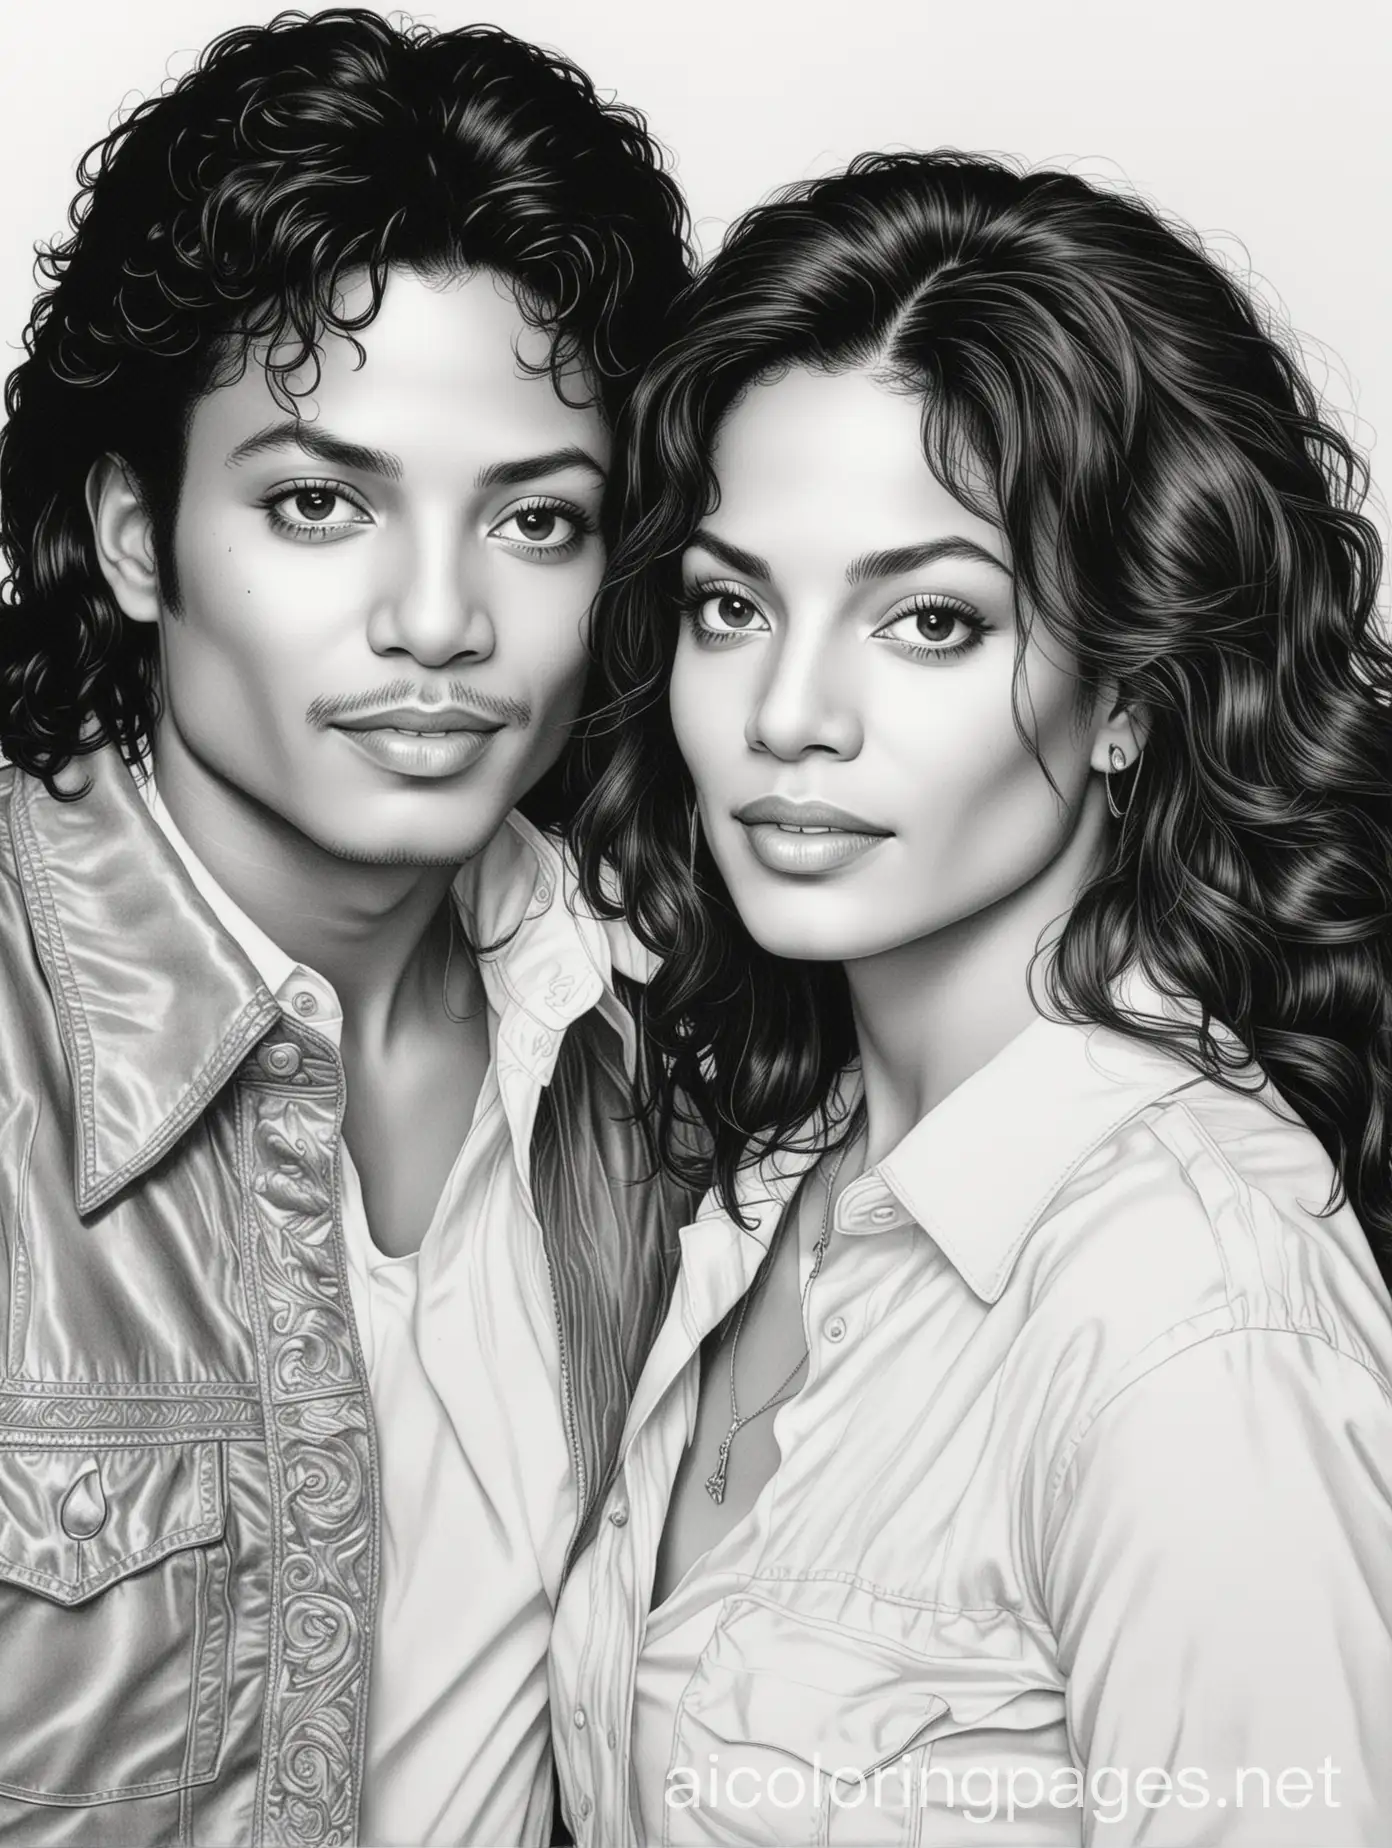 Michael jackson and Maripily Rivera, Coloring Page, black and white, line art, white background, Simplicity, Ample White Space. The background of the coloring page is plain white to make it easy for young children to color within the lines. The outlines of all the subjects are easy to distinguish, making it simple for kids to color without too much difficulty